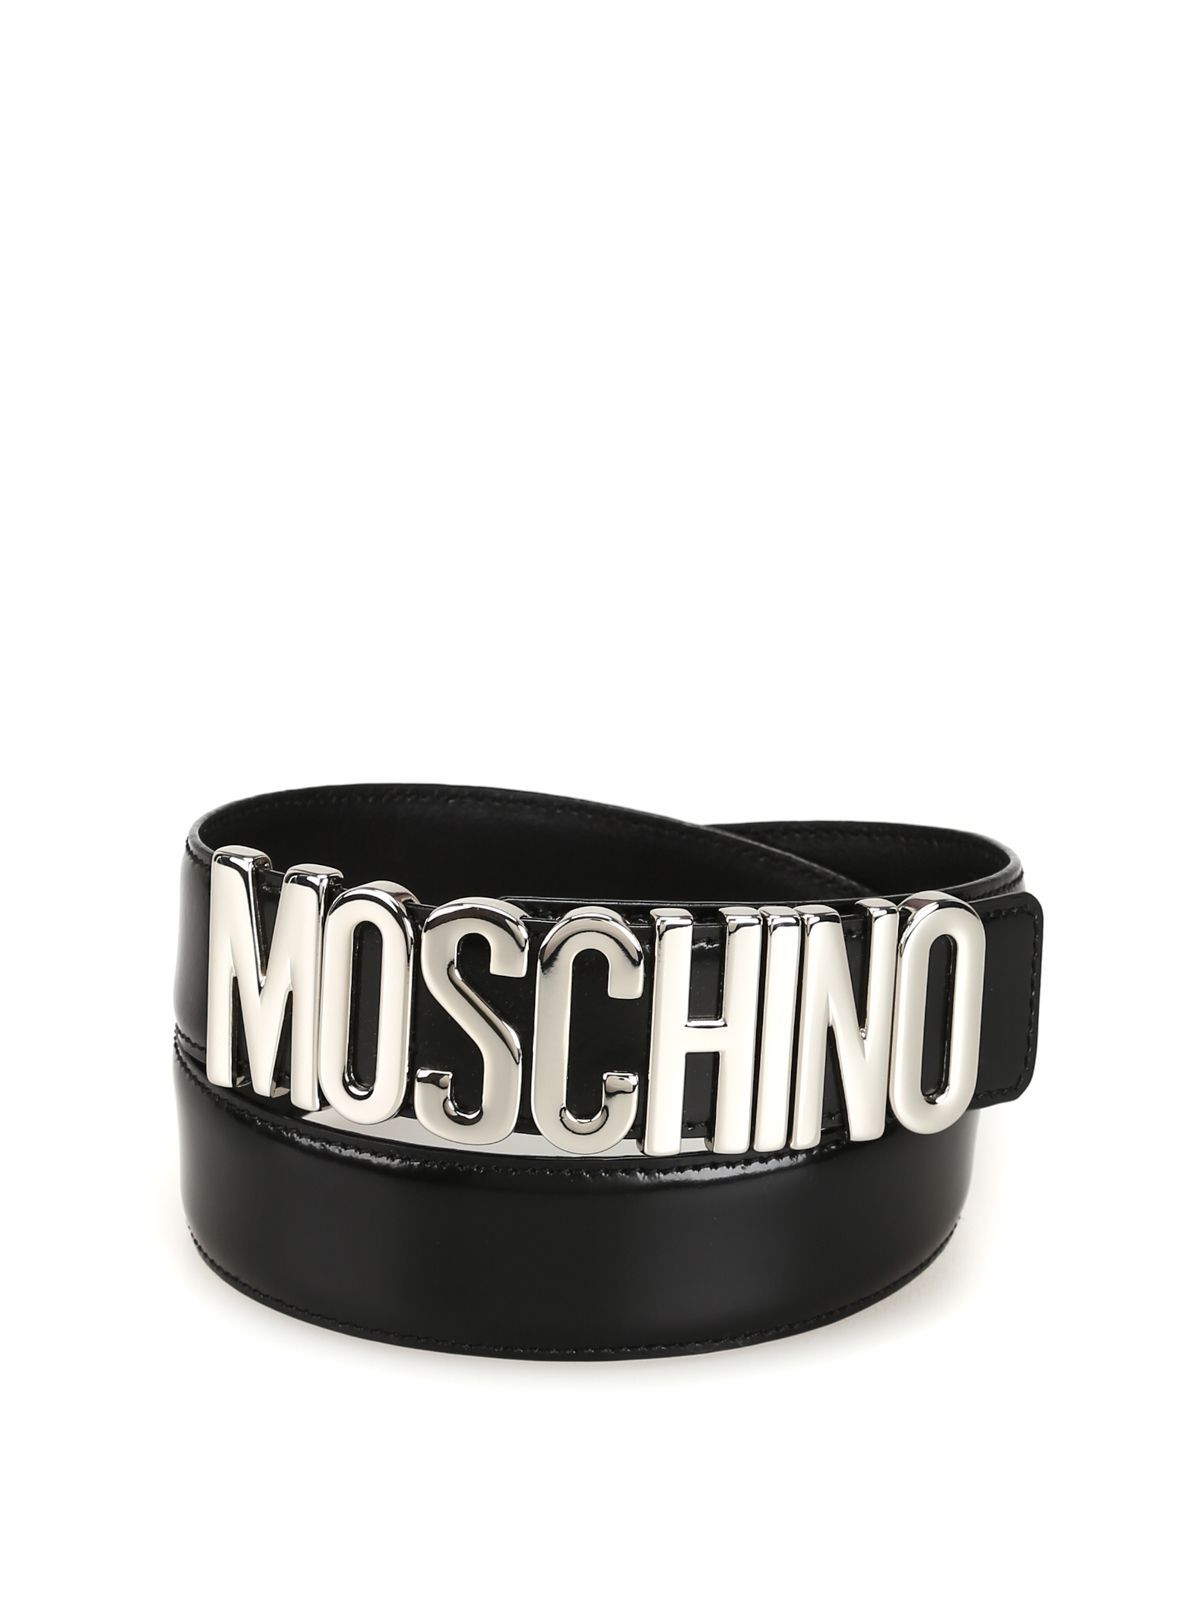 BELT MOSCHINO, LEATHER 100%, color BLACK, Height 3.5cm, Width 3.5cm, CO, product code A801280071555